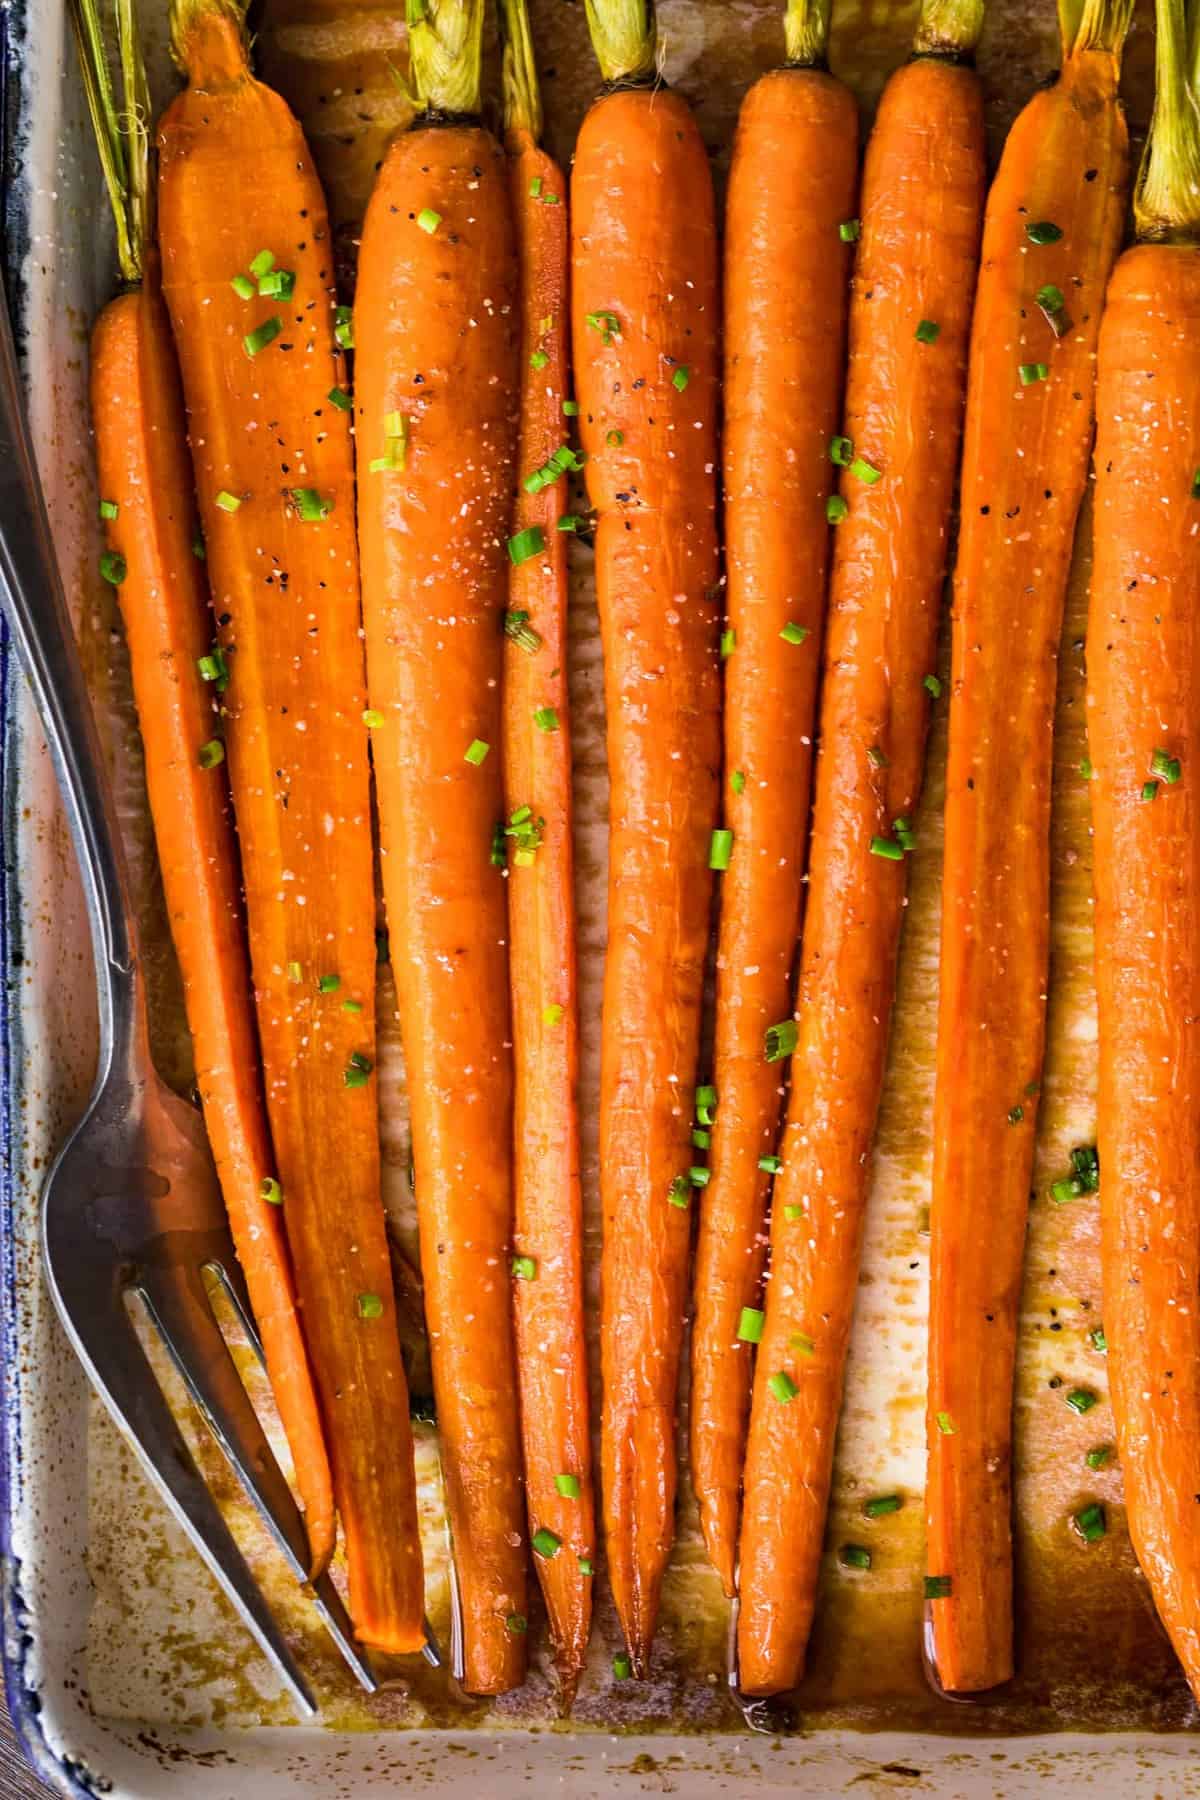 Brown Butter Glazed Carrots sprinkled with a green garnish